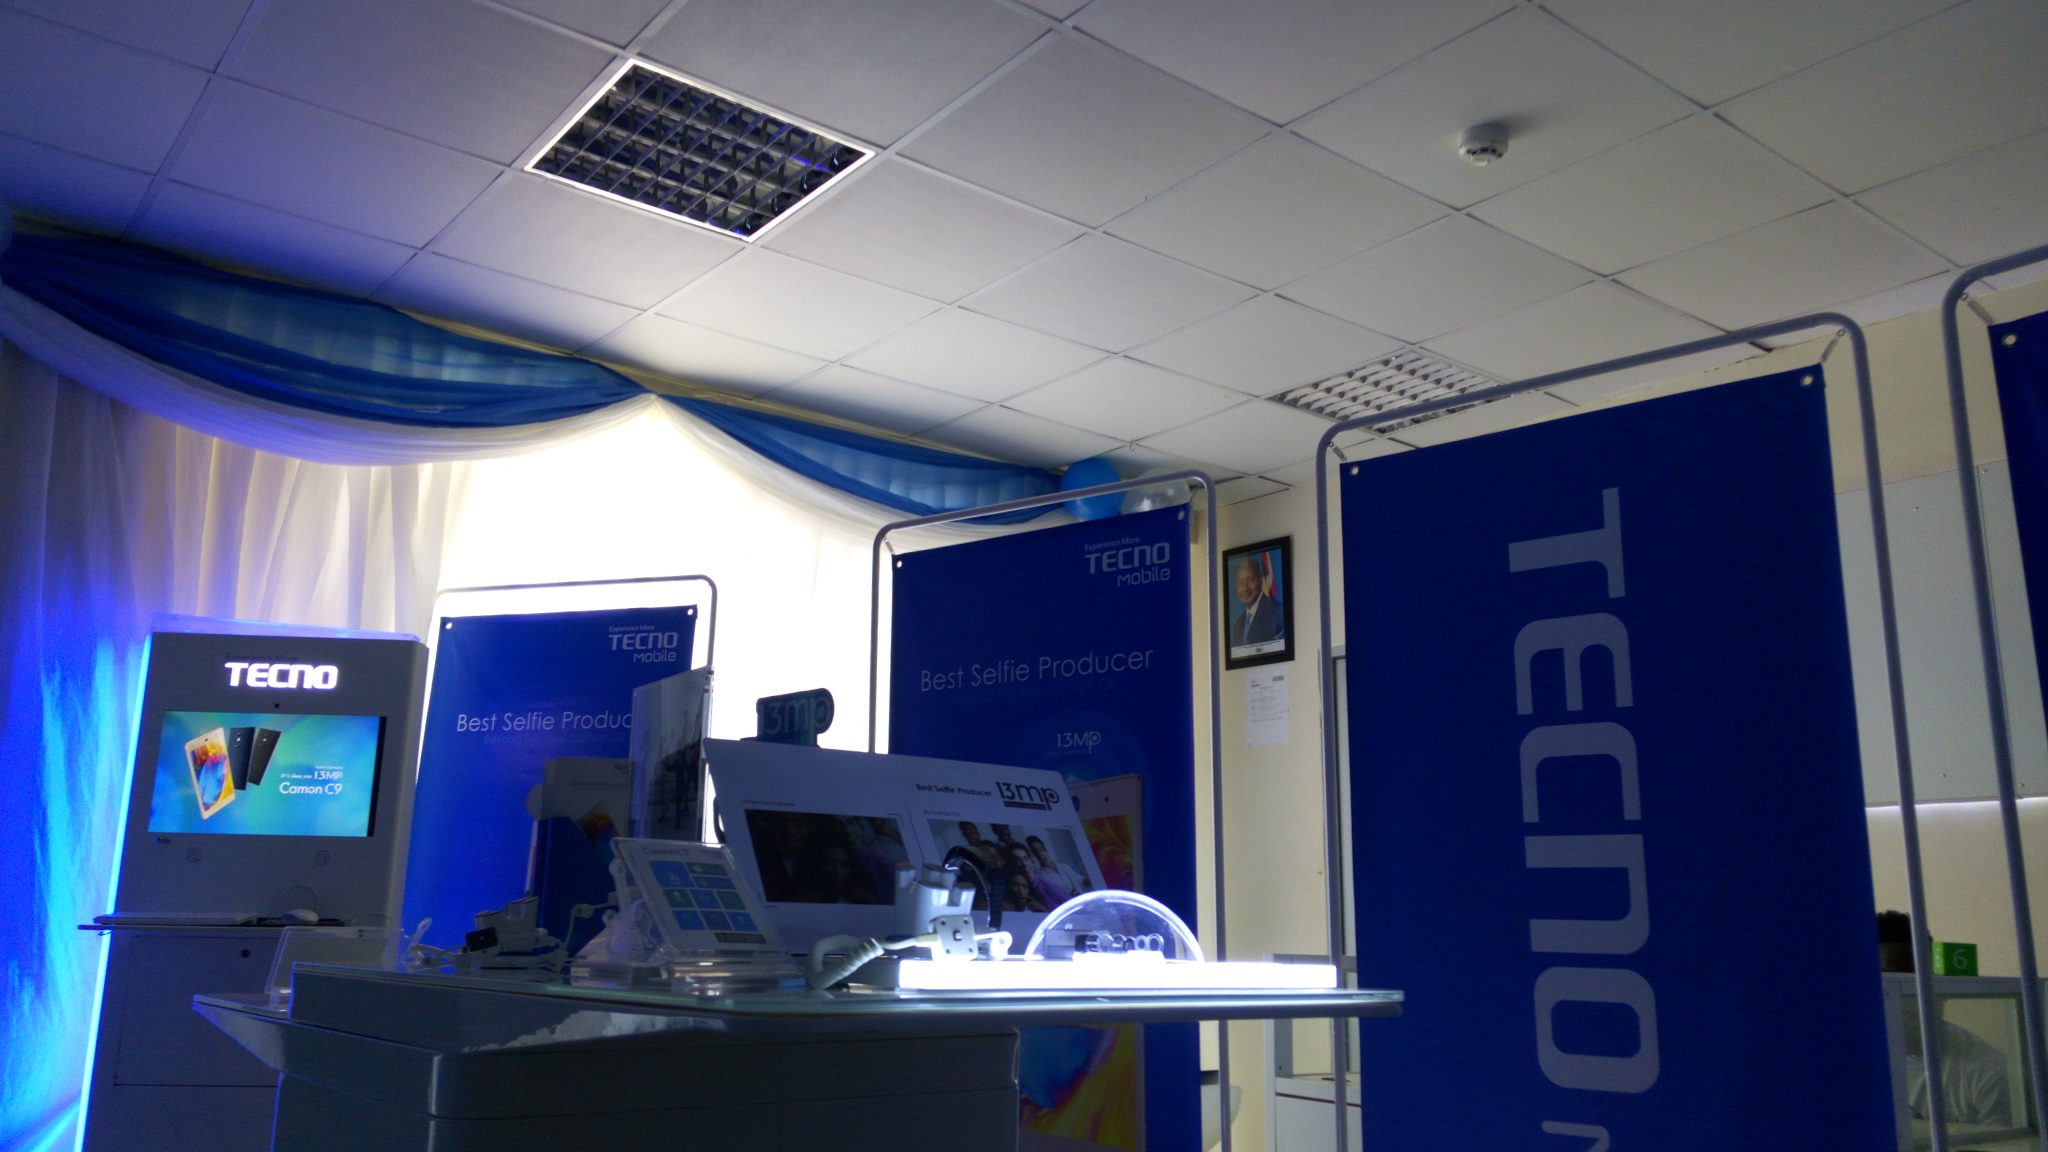 The Camon C9 on display at the Tecno Offices